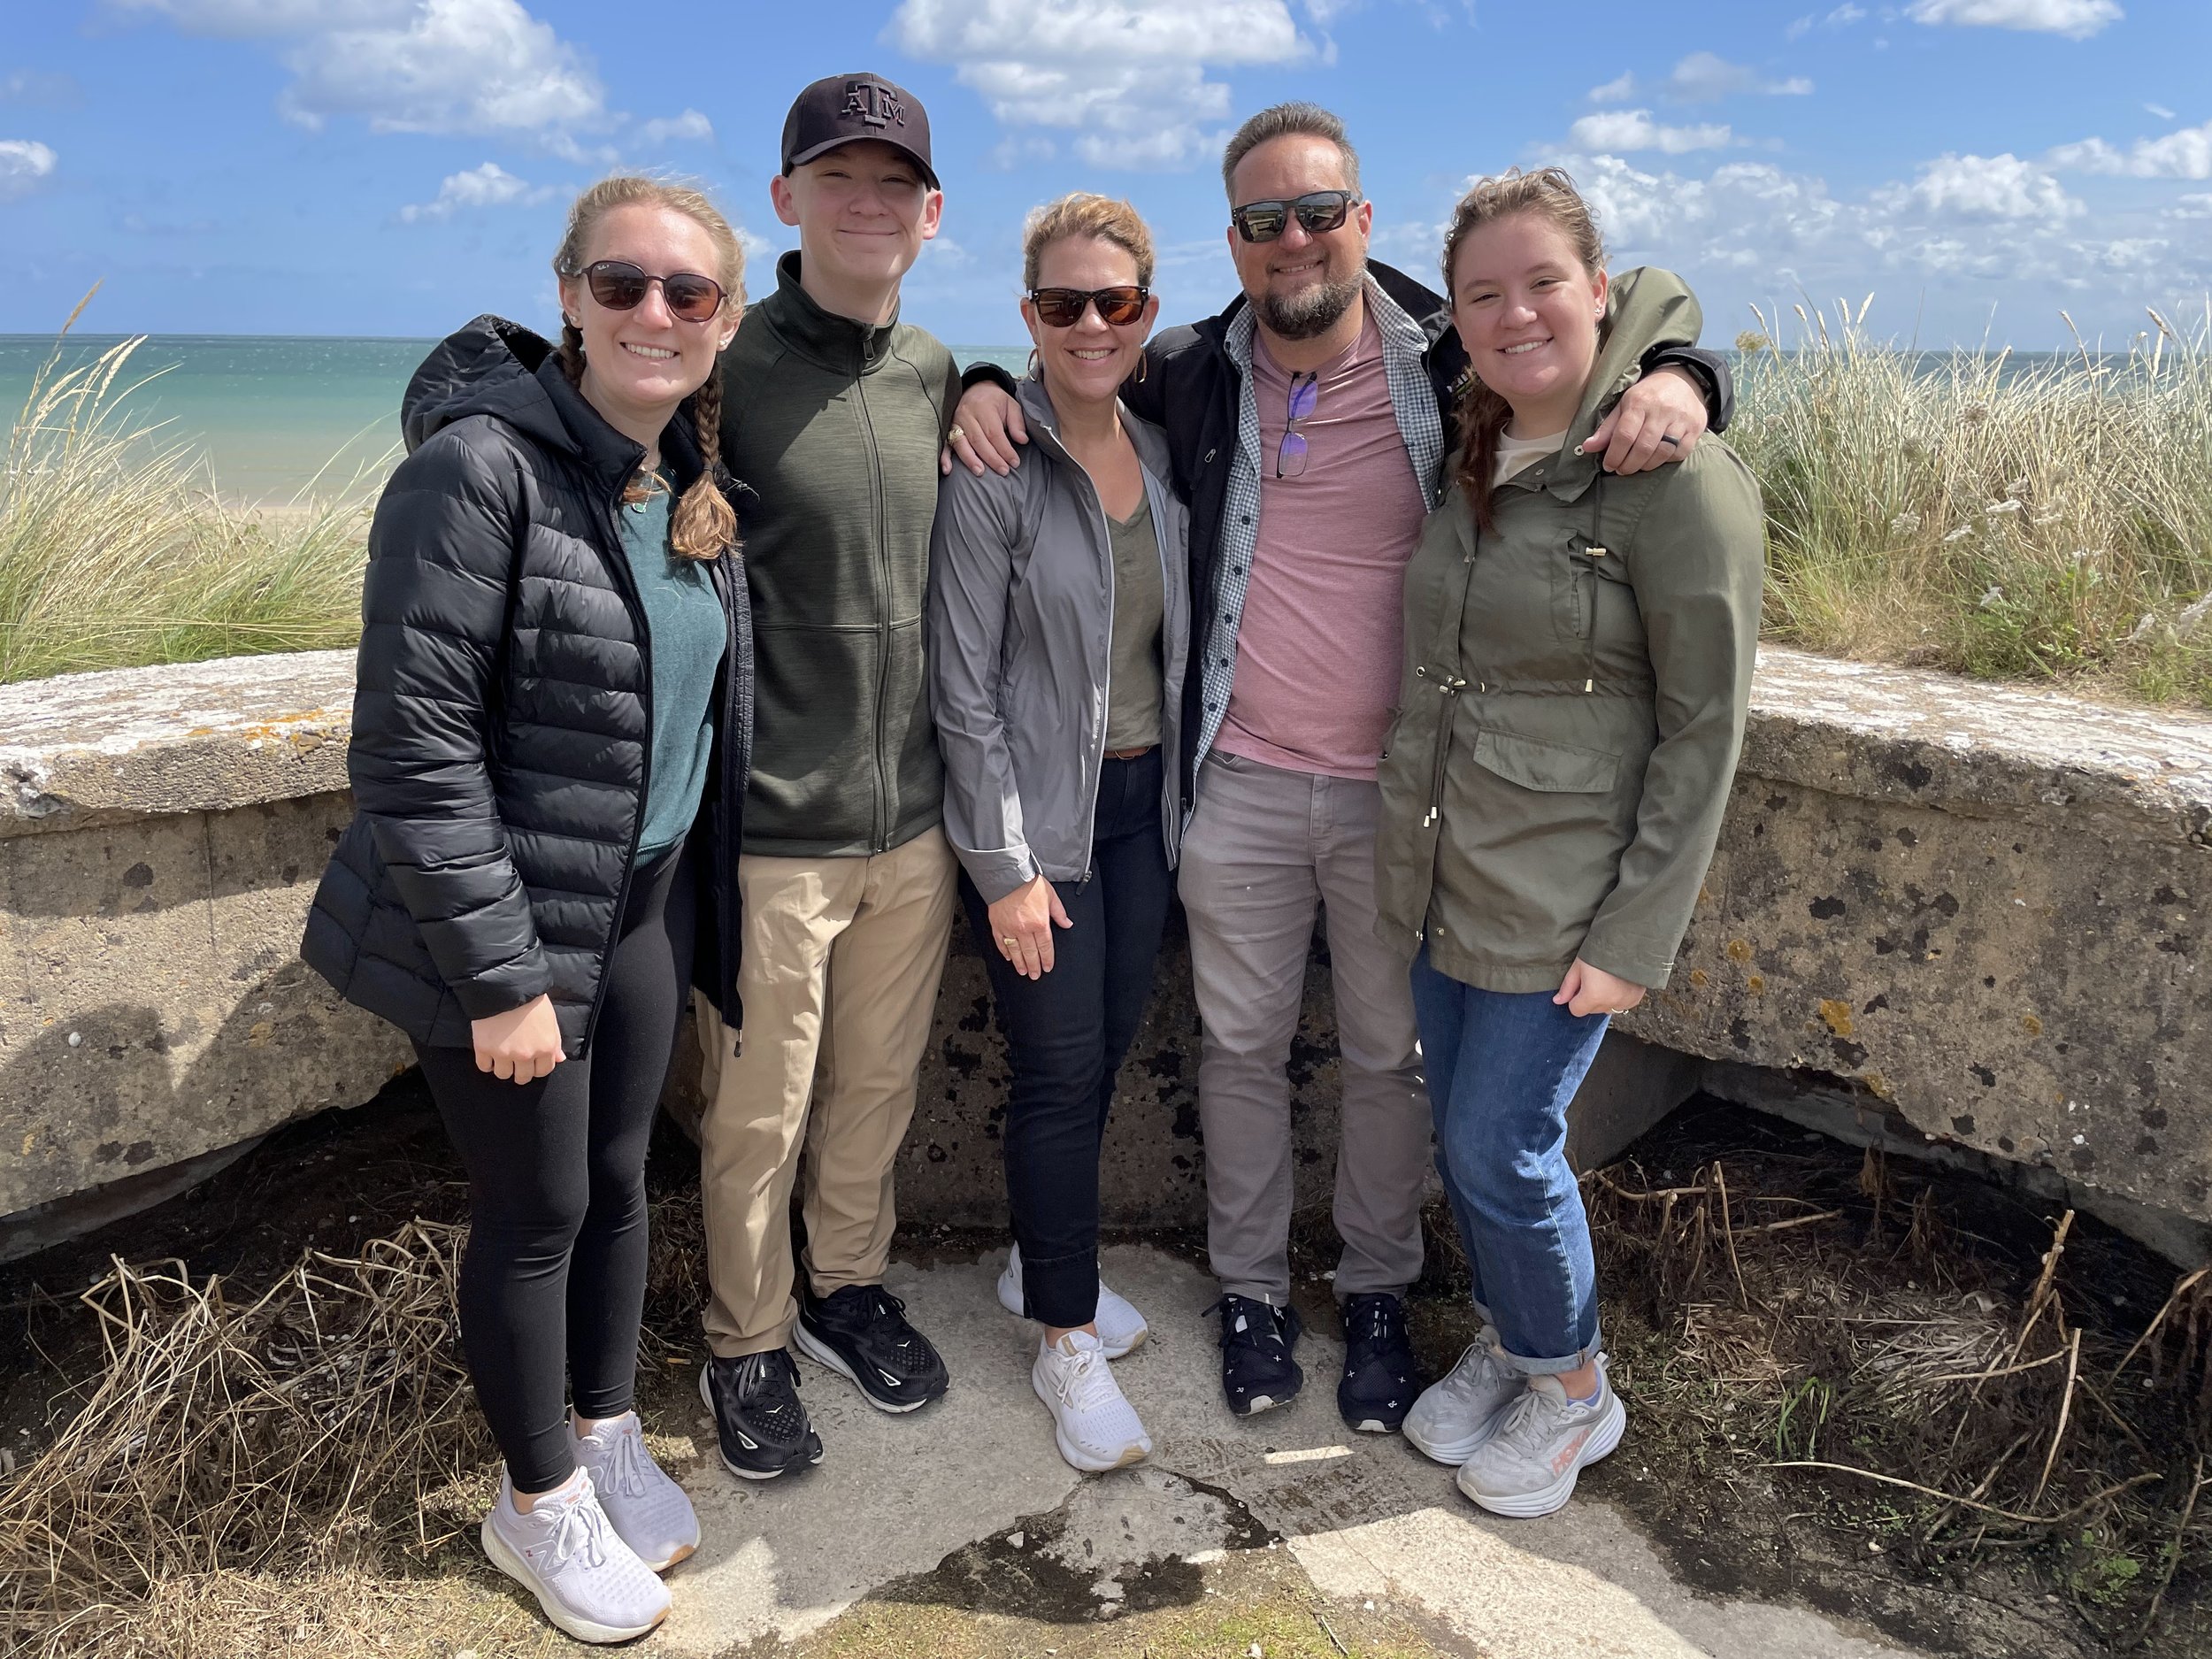 Jack T and Family at the beaches of Normandy